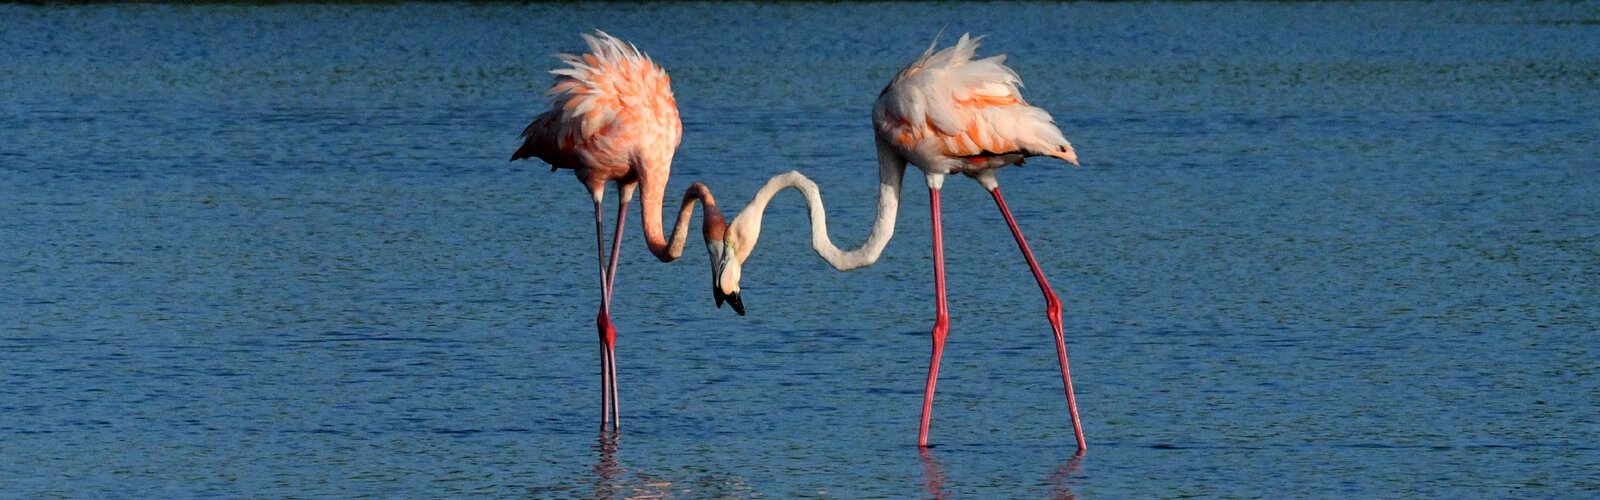 While foraging, the male flamingo heard his mate calling him softly, and with pink feathers ruffled out in excitement, the two reunited beak to beak.